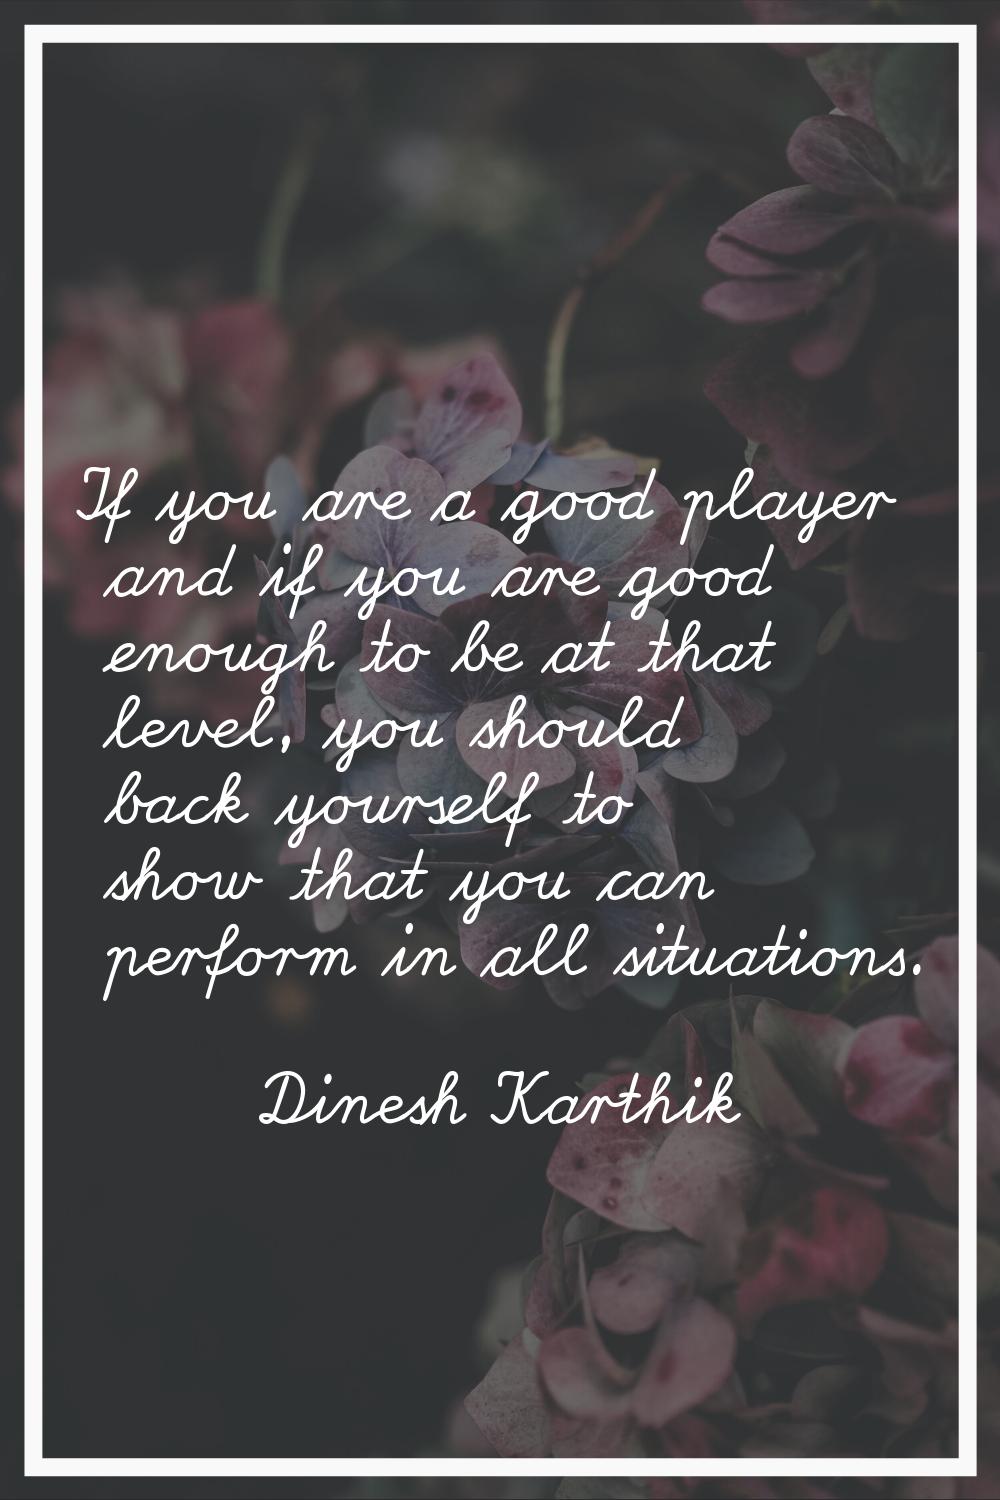 If you are a good player and if you are good enough to be at that level, you should back yourself t